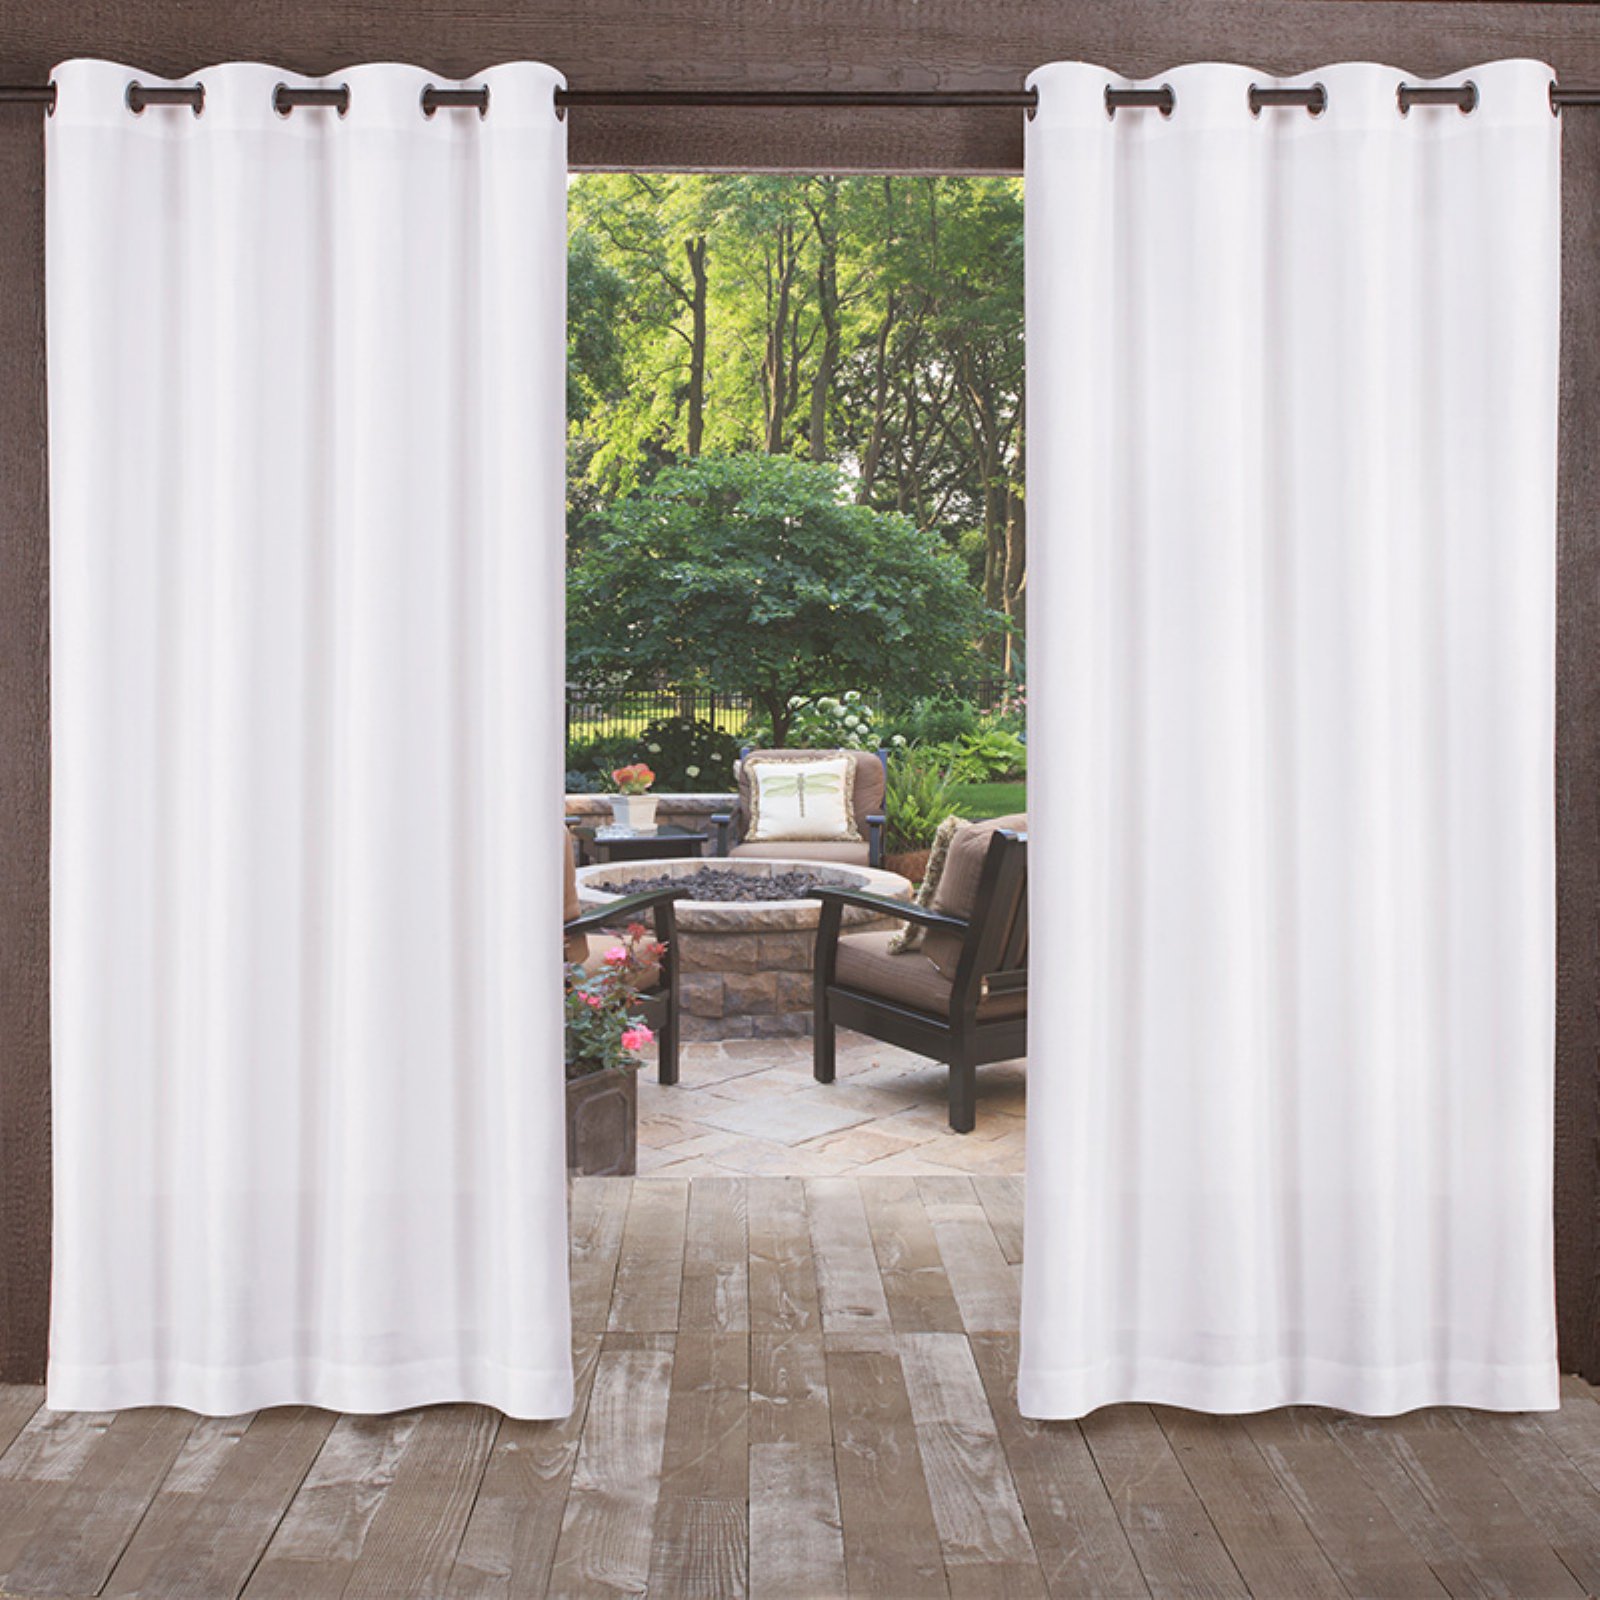 Exclusive Home Biscayne Indoor/Outdoor Two Tone Textured Grommet Top Curtain Panel Pair, 54"x108", Natural - image 2 of 6